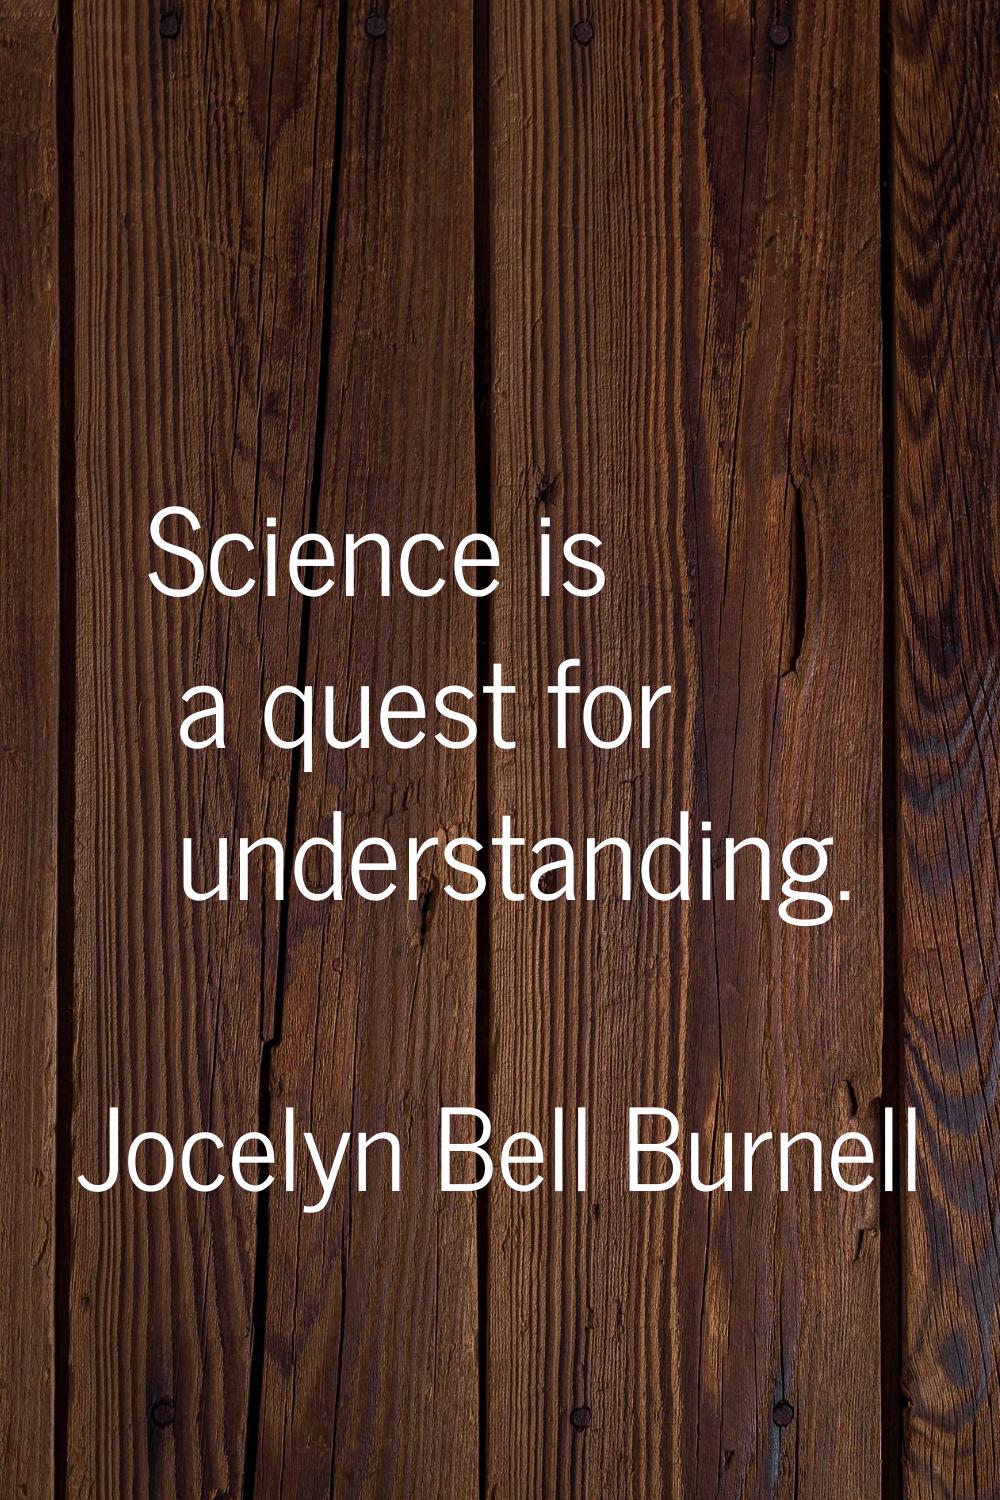 Science is a quest for understanding.